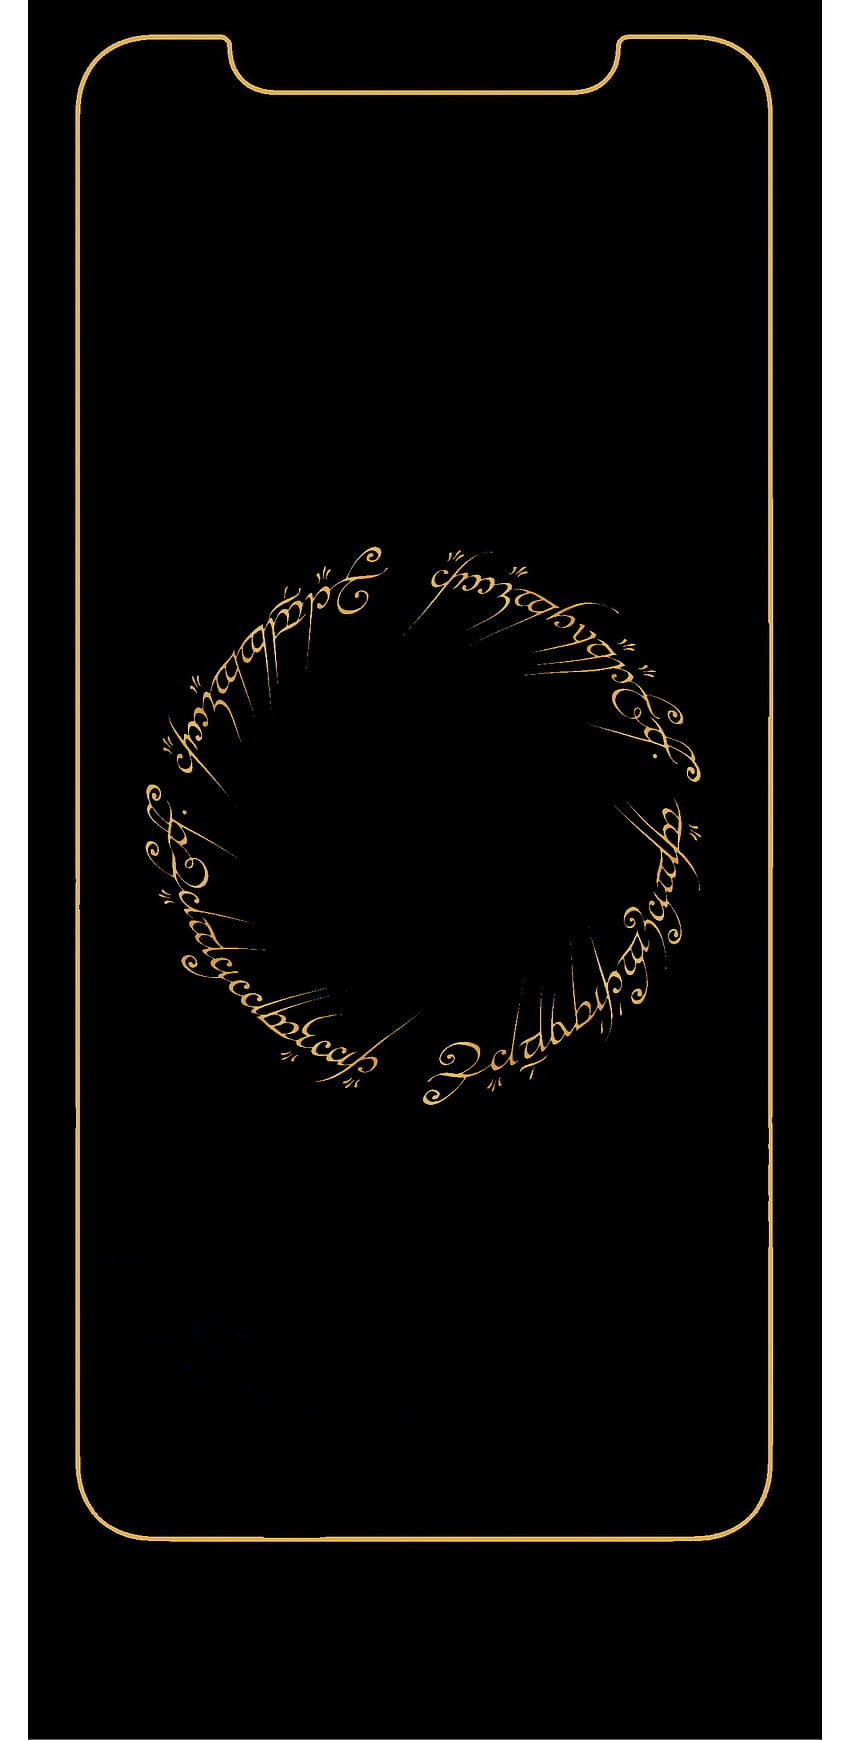 Lord Of The Rings Iphone HD phone wallpaper